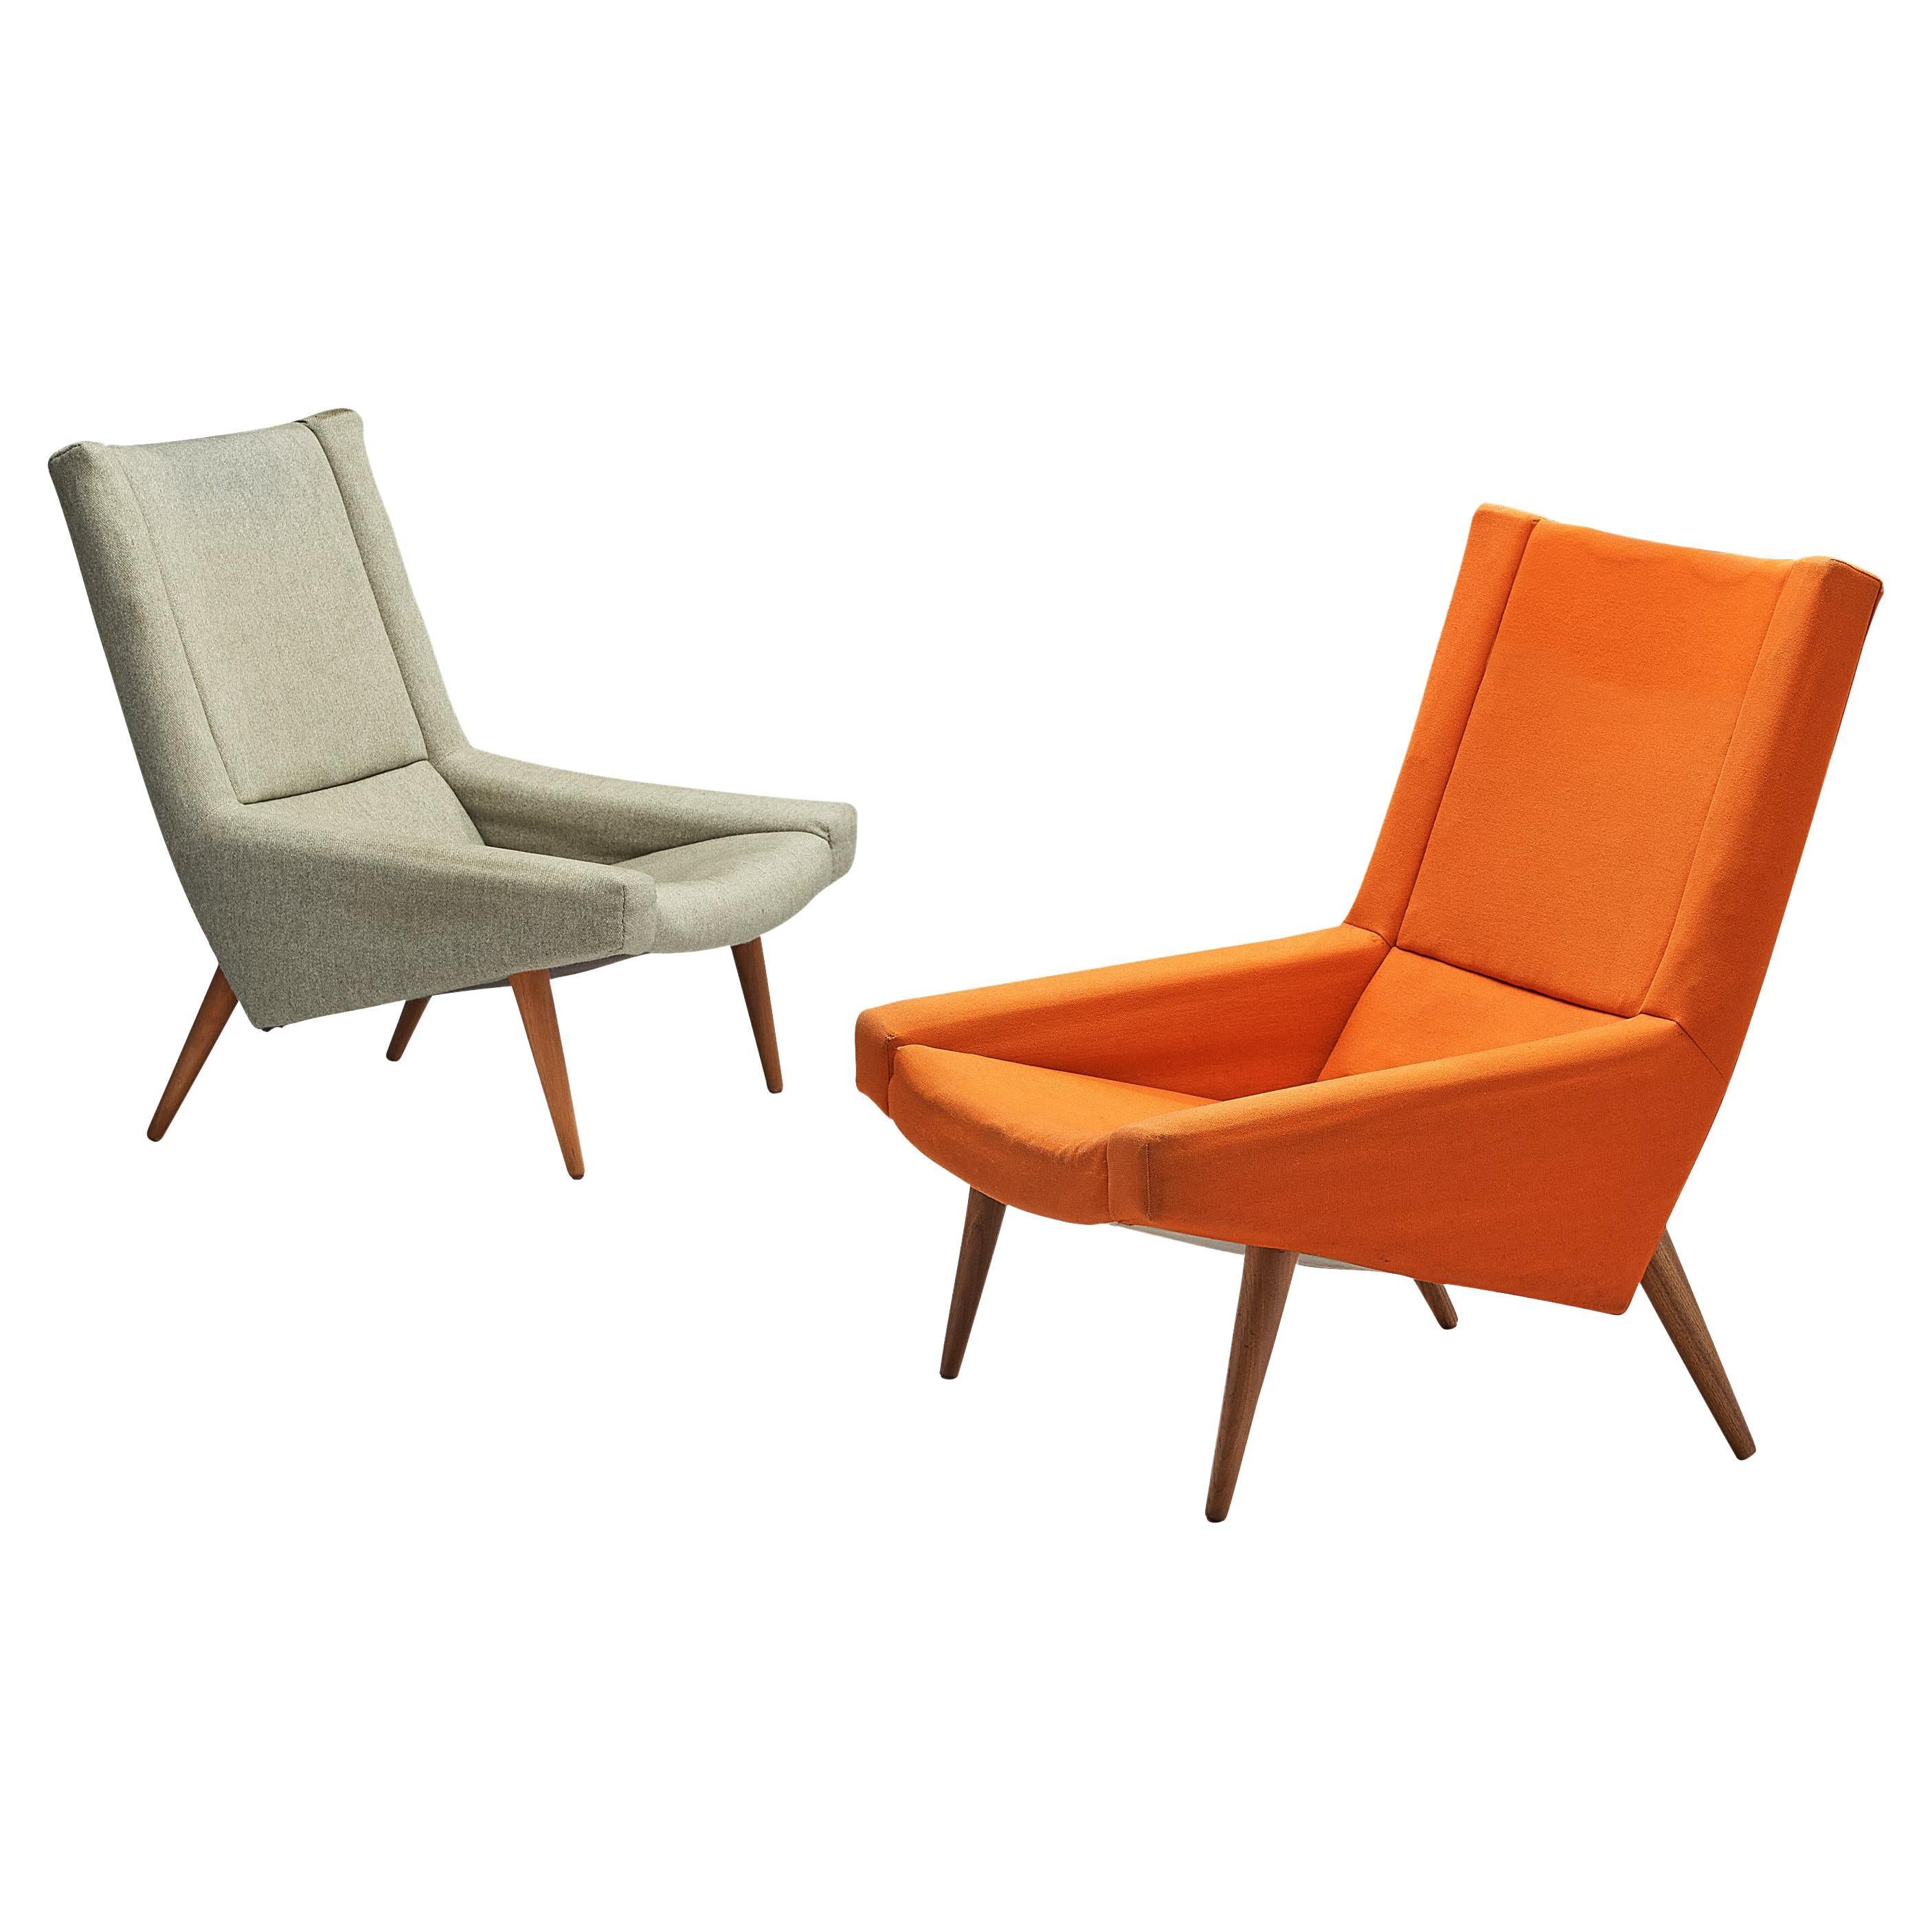 Illum Wikkelsø Pair of Lounge Chairs in Teak and Grey Orange Upholstery  For Sale